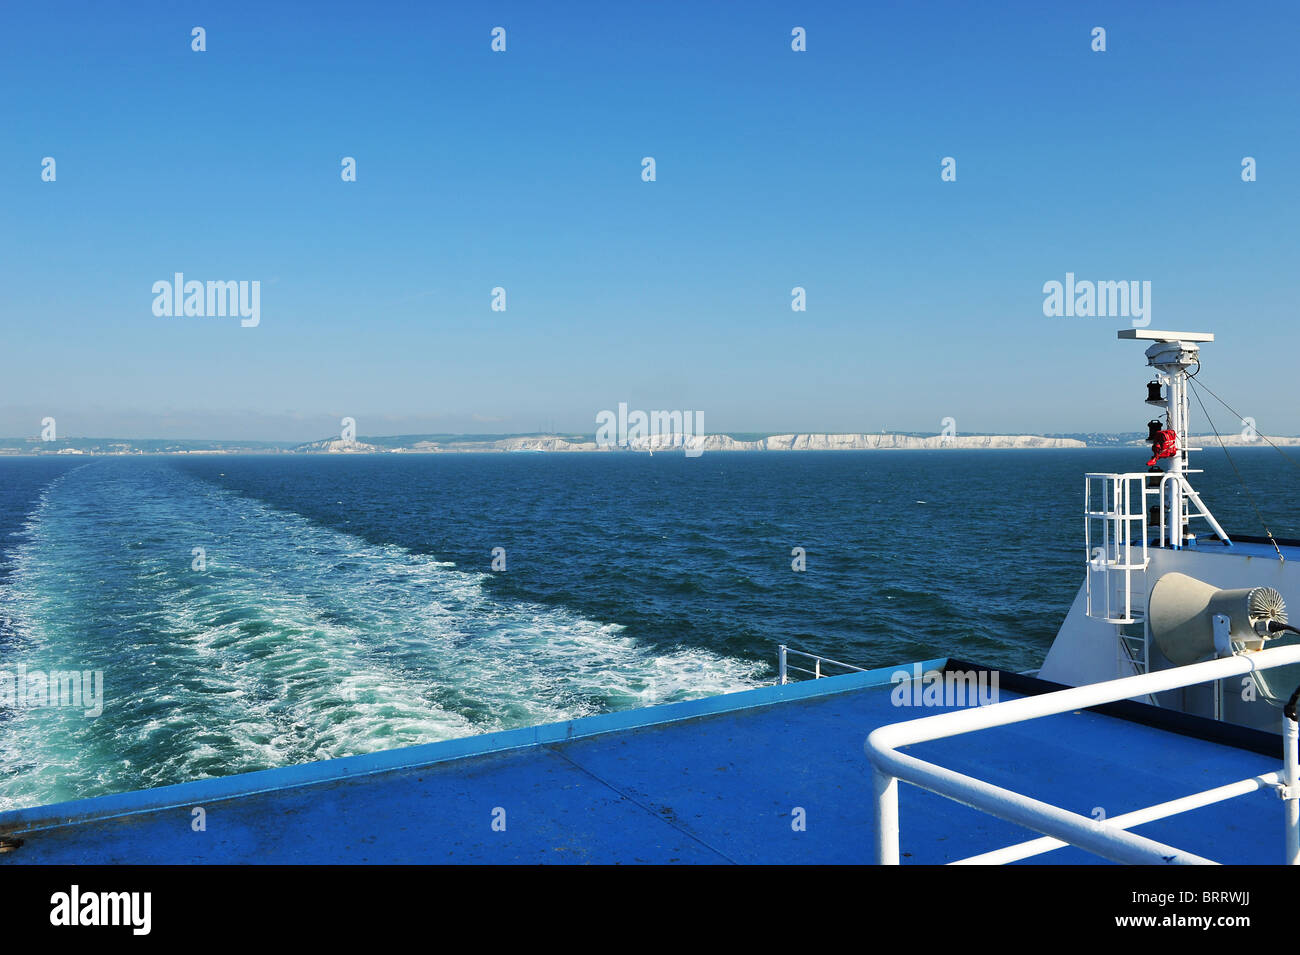 View from the rear of a ship as it sails across the English Channel between Dover, England and Calais, France. Stock Photo